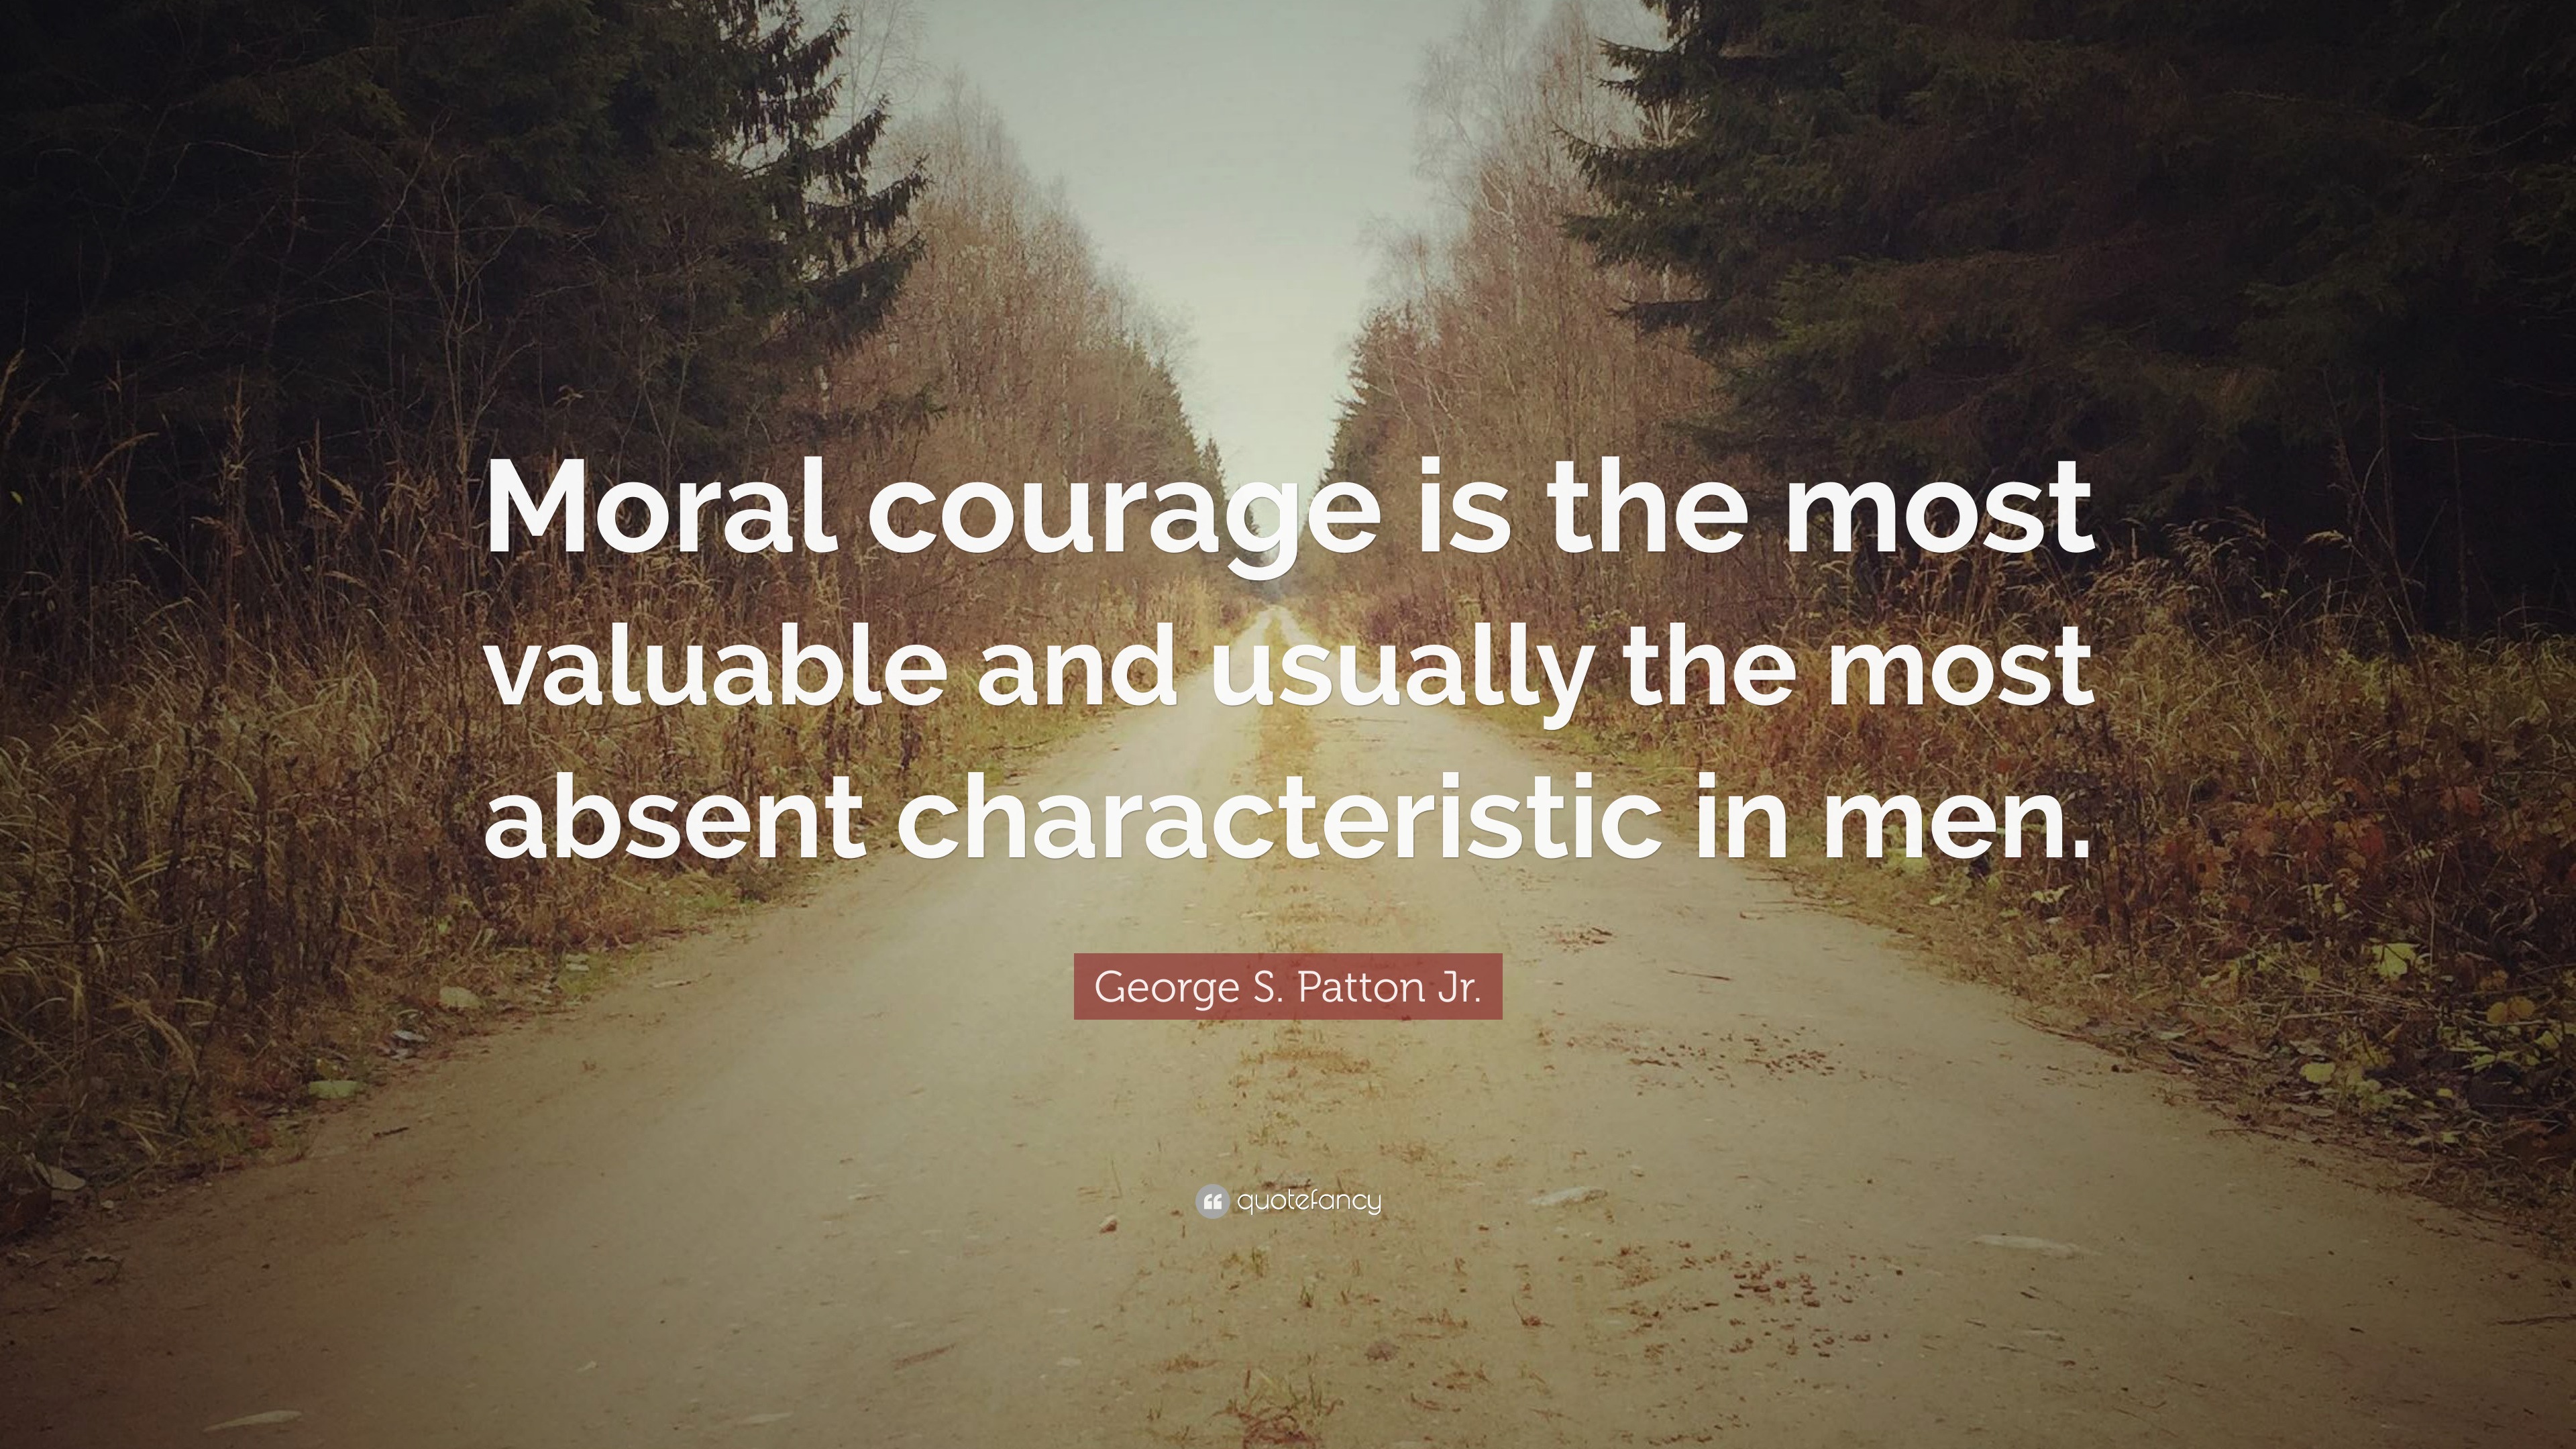 George S. Patton Jr. Quote: “Moral courage is the most valuable and